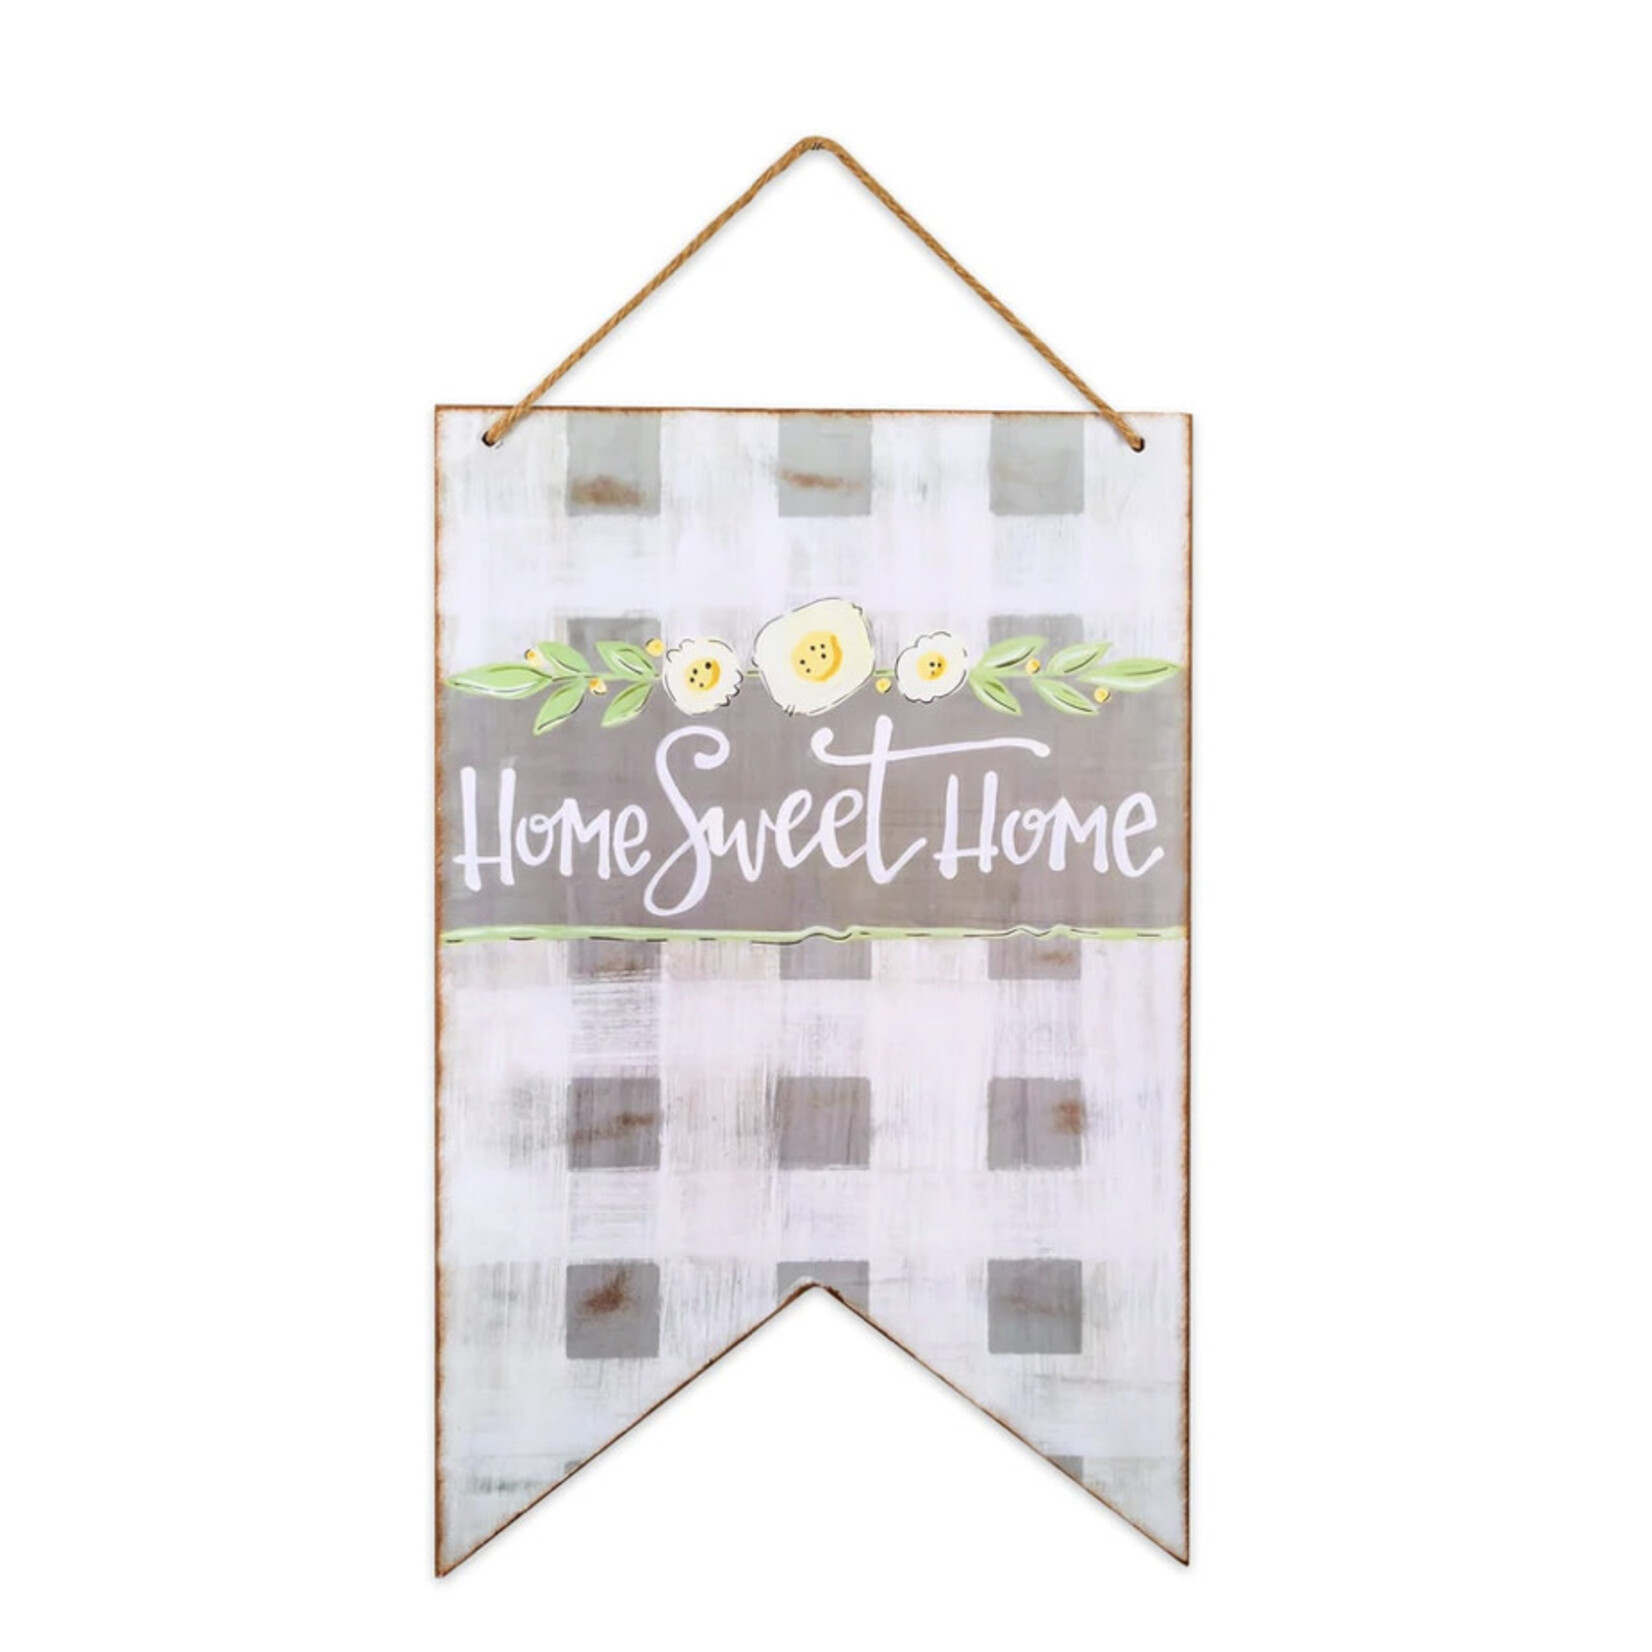 Brownlow Home Sweet Home Wall Decor